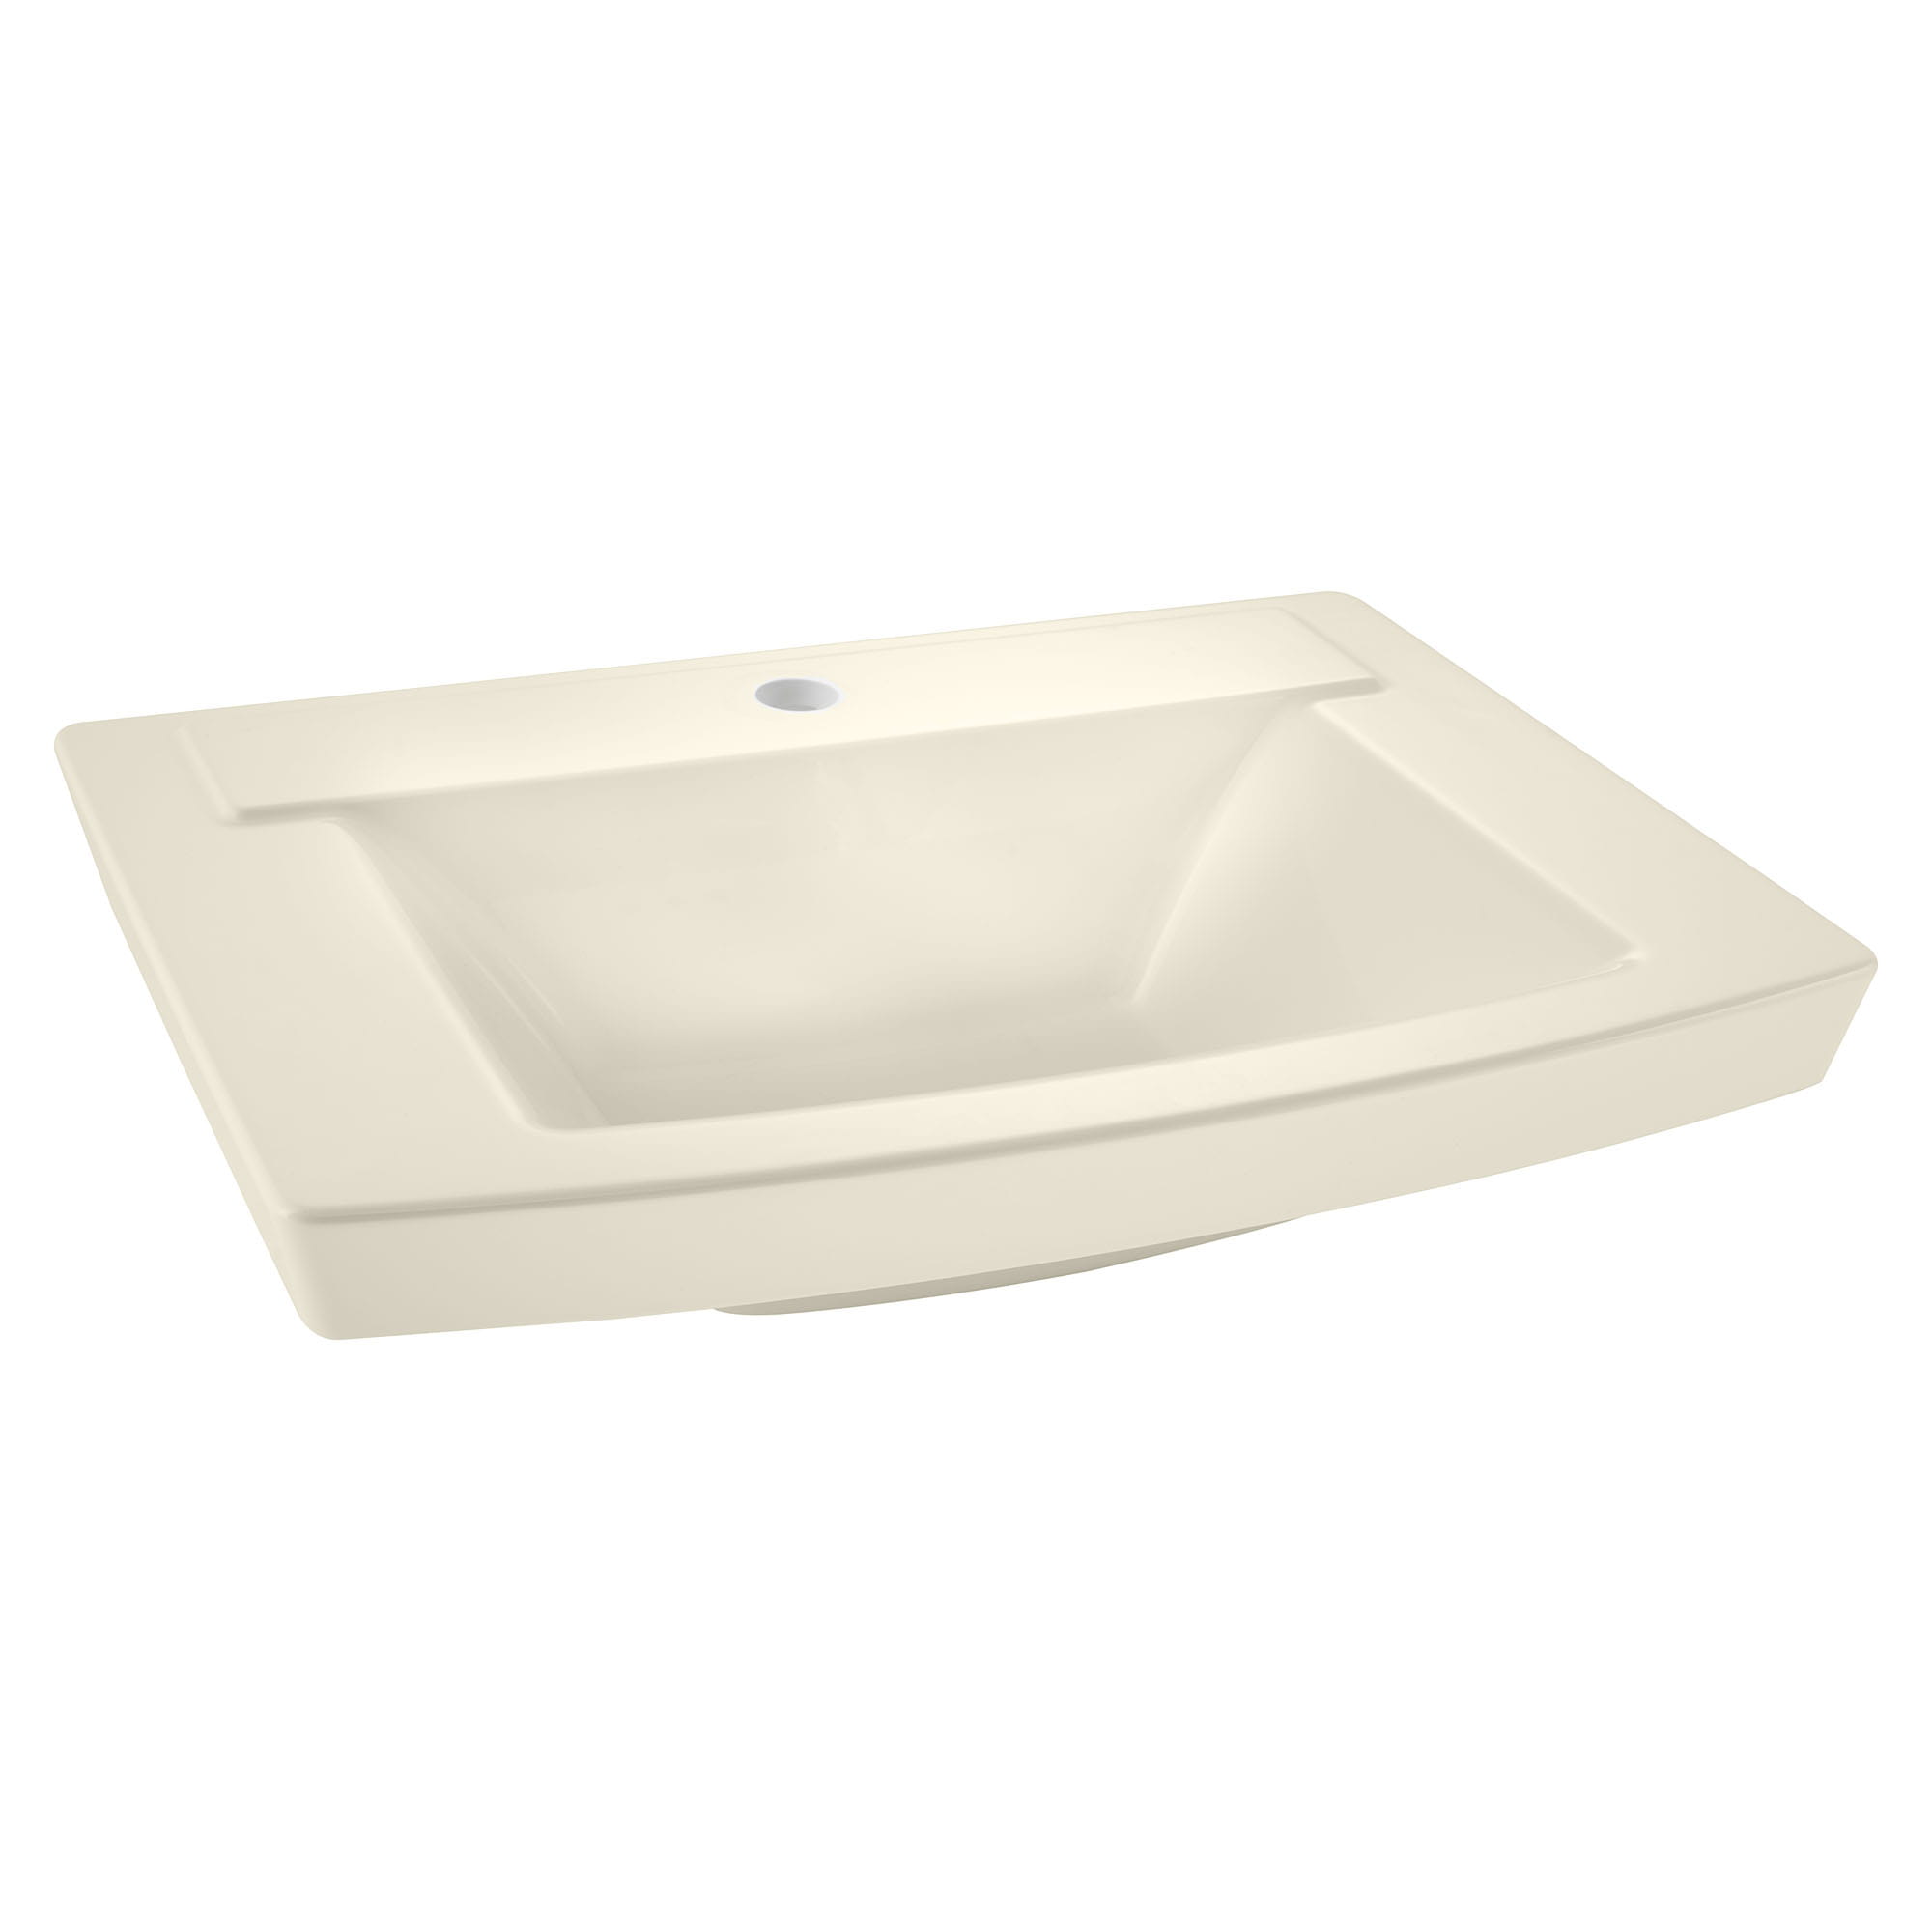 Townsend 24 x 18 Inch Above Counter Sink With Center Hole Only LINEN